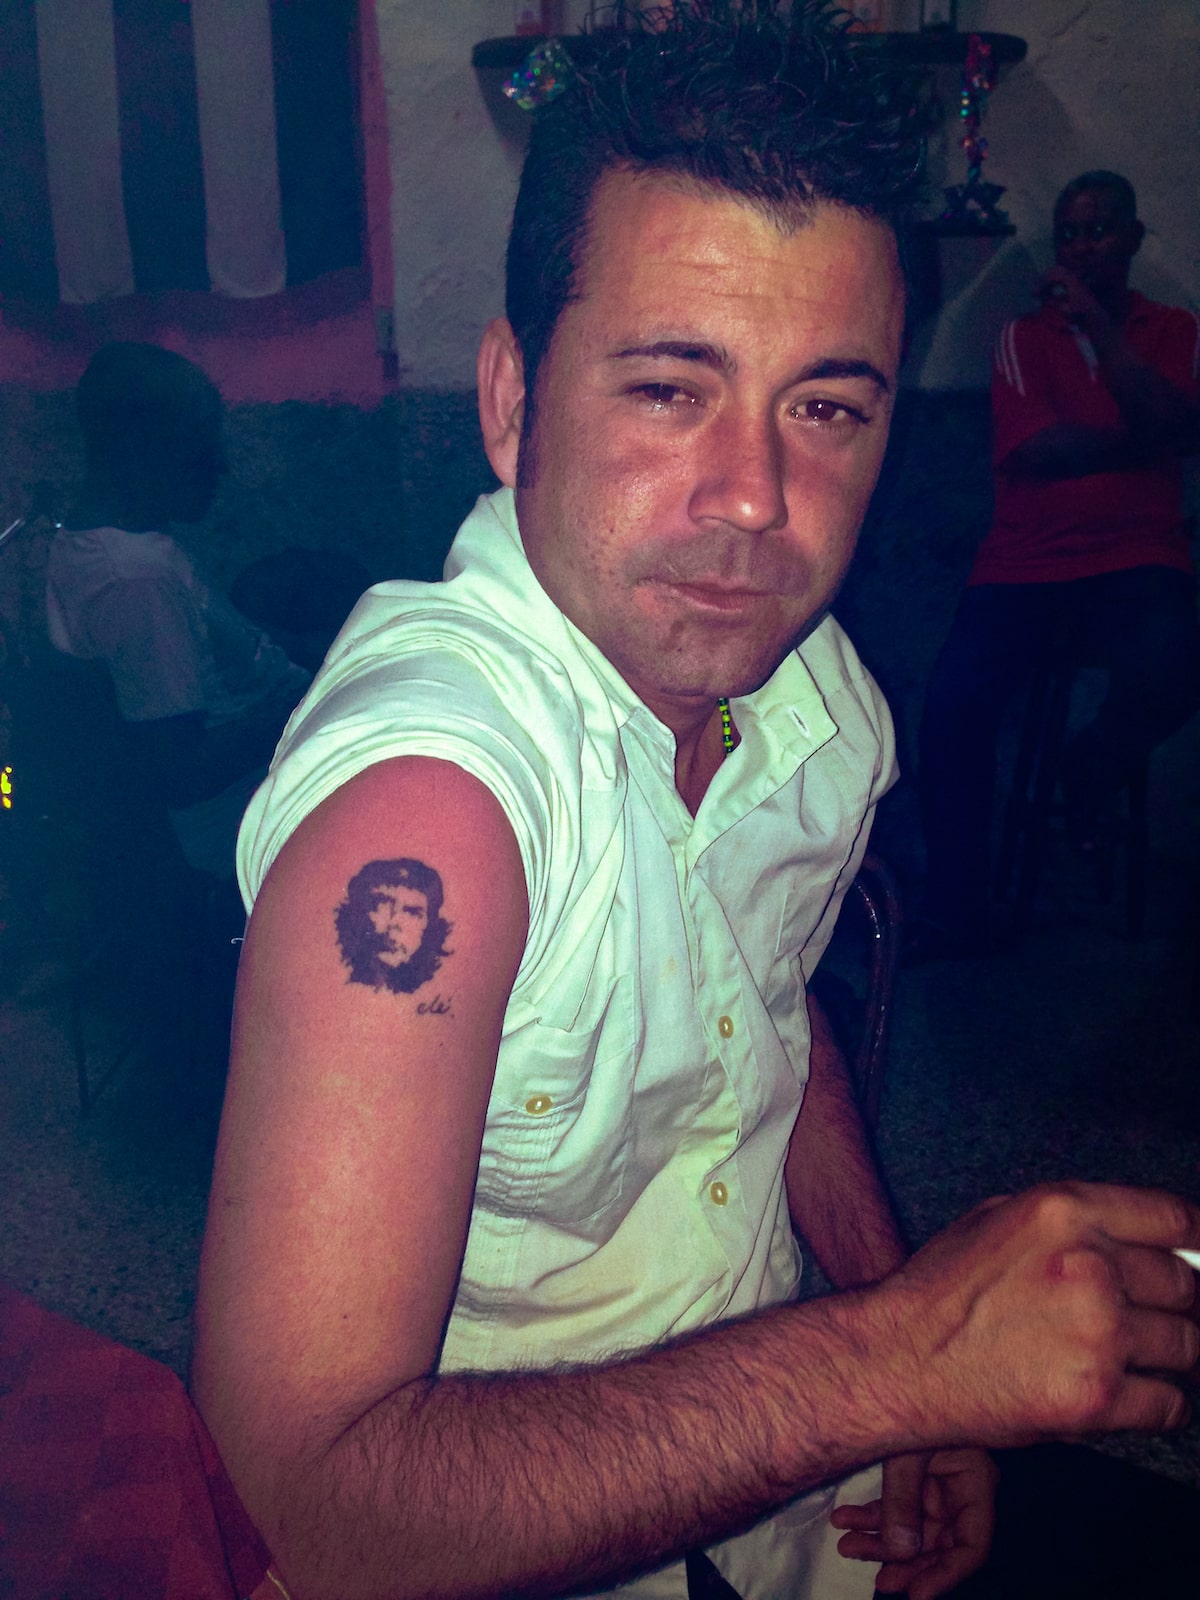 A local man poses with his Che Guevara tattoo on his arm in a bar in Havana, Cuba.